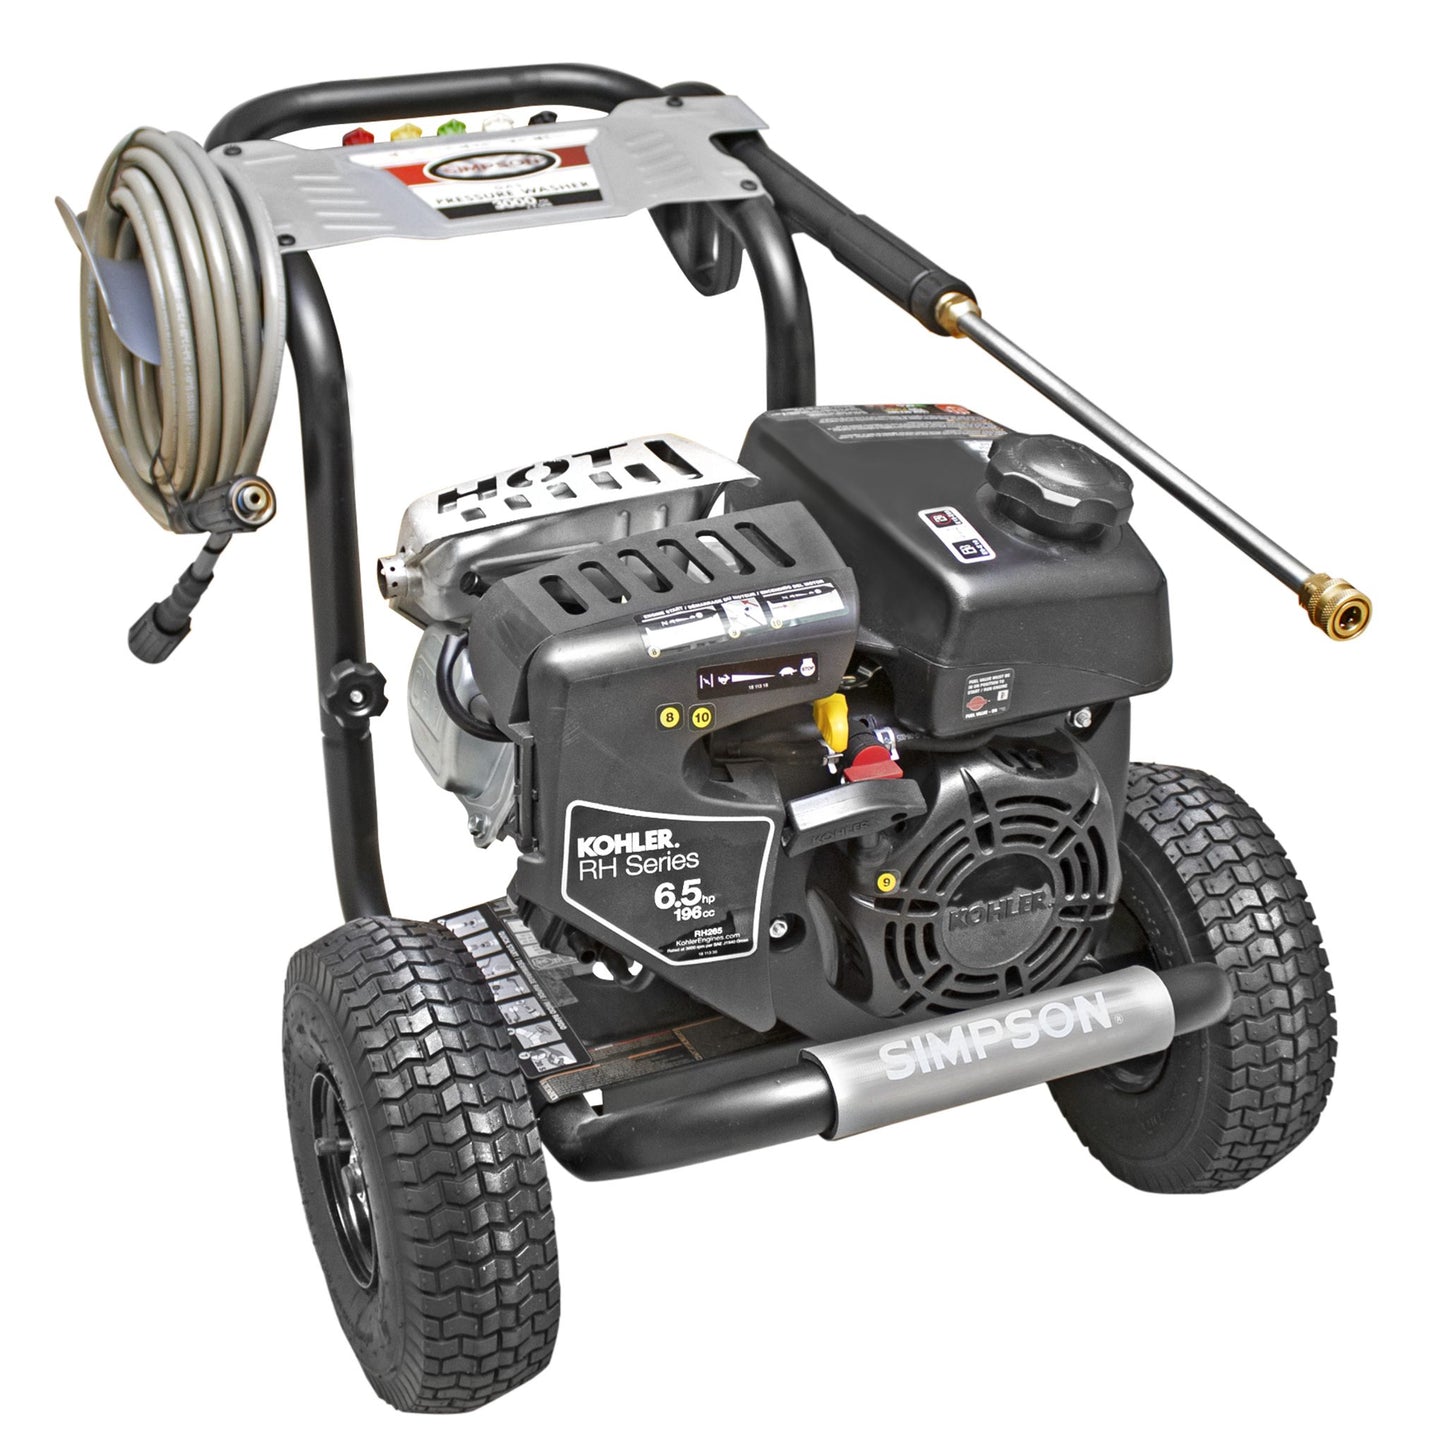 Simpson 3000 PSI at 2.4 GPM Kohler RH265 with OEM Technologies Axial Cam Pump Cold Water Premium Residential Gas Pressure Washer Factory Serviced